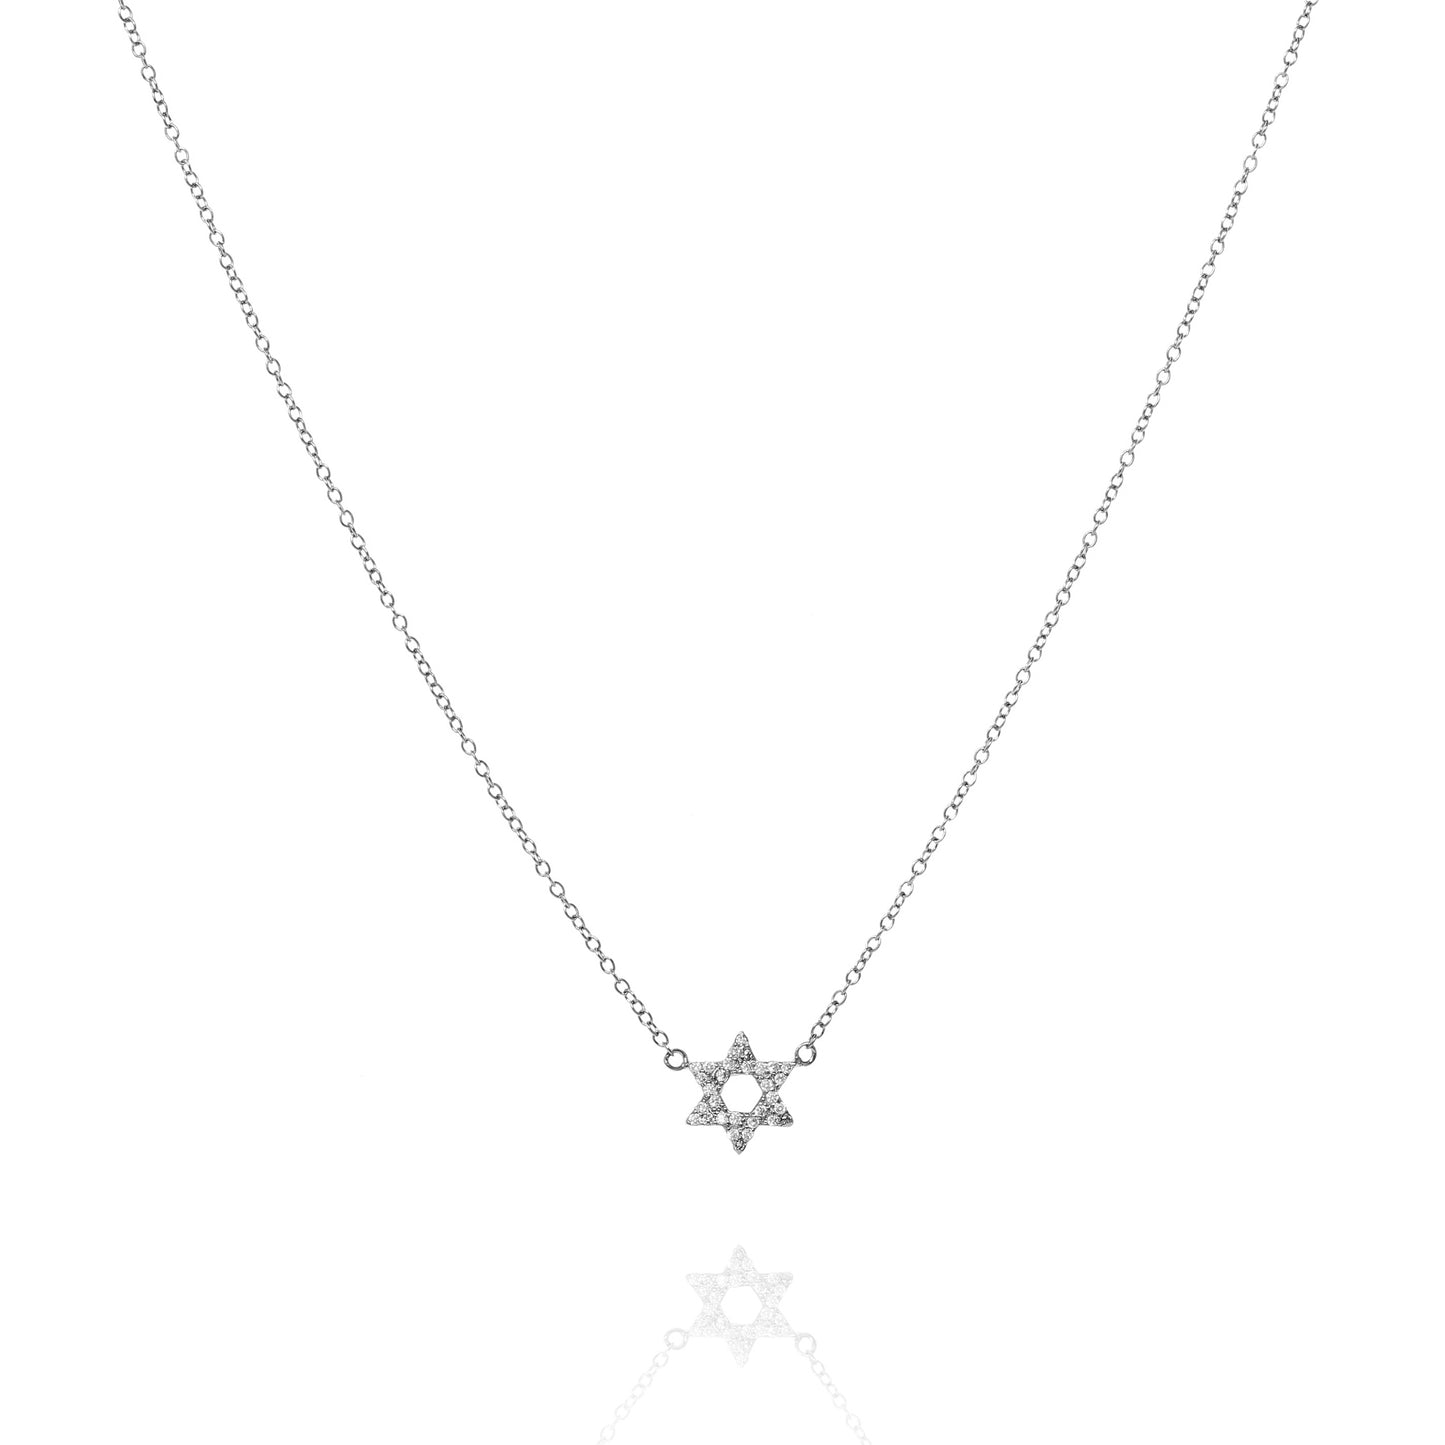 NF-66/S - Chain with Pave Star of David Pendant